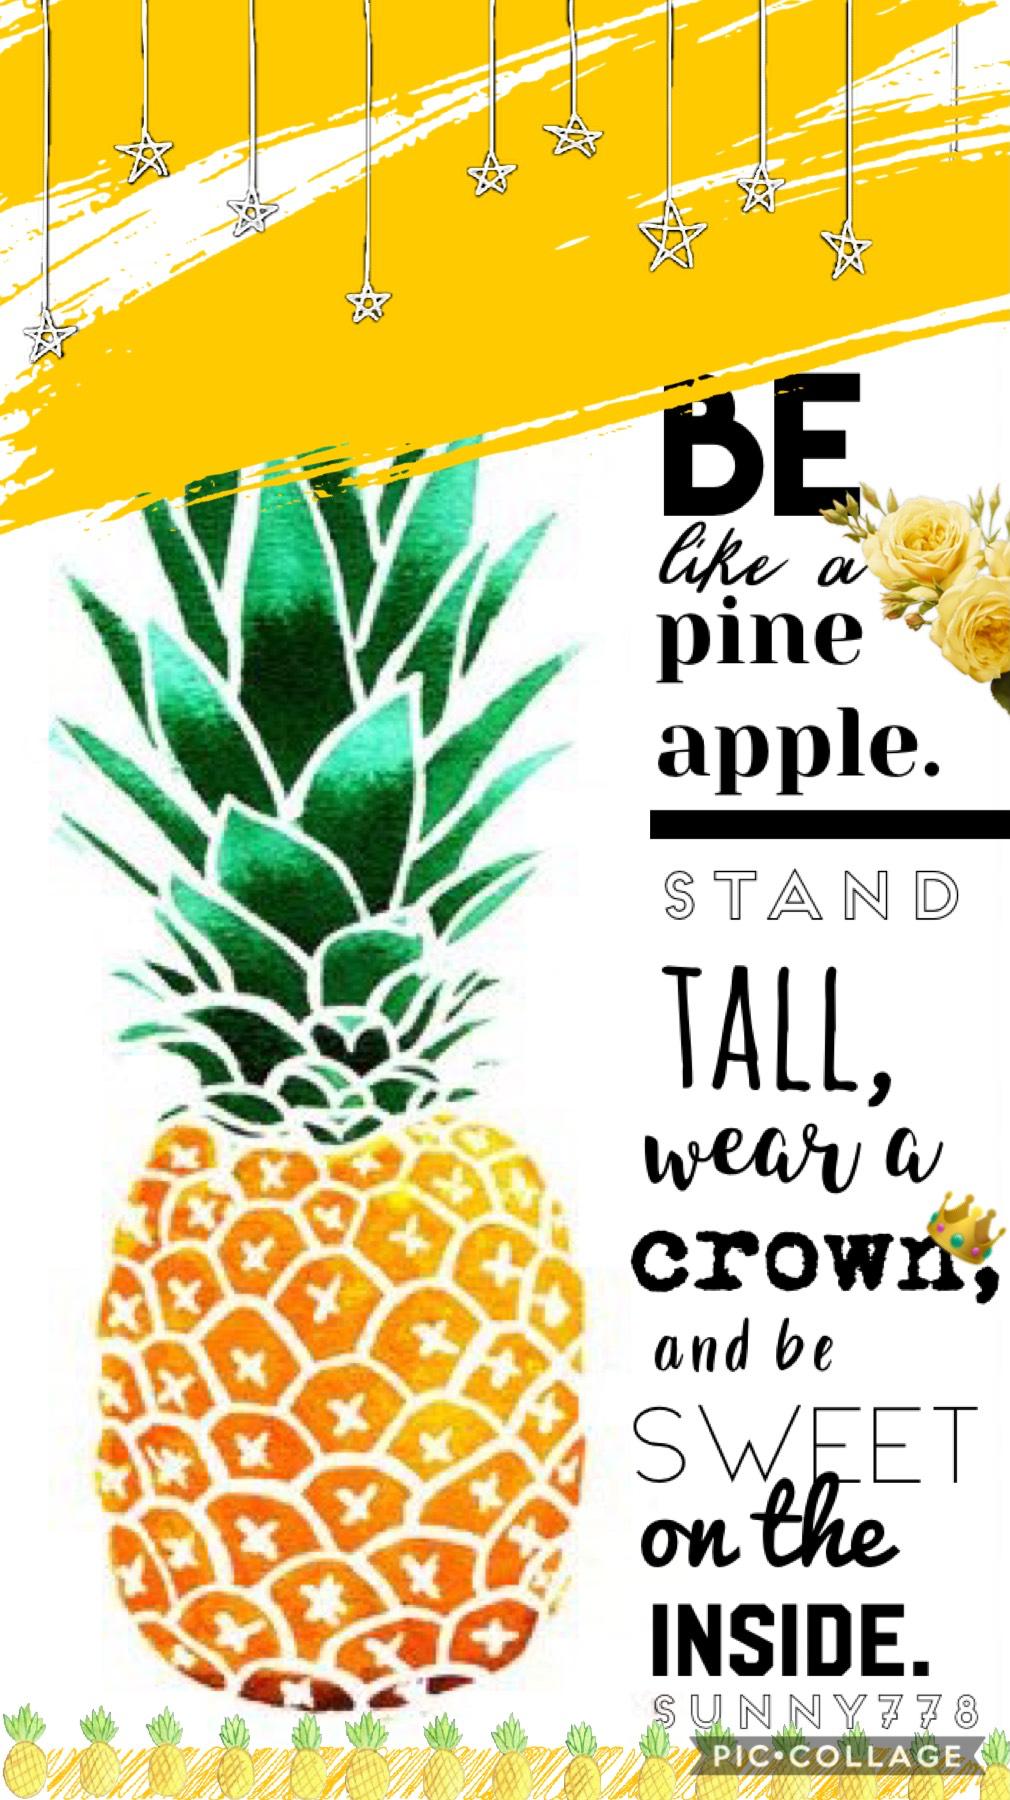 TAP
🍉☀️[17/11/2018]☀️🍉
Stand tall. Wear a crown. Remember to be sweet. Am seeing Crimes of Grindelwald for the first time today, am so excited!!!